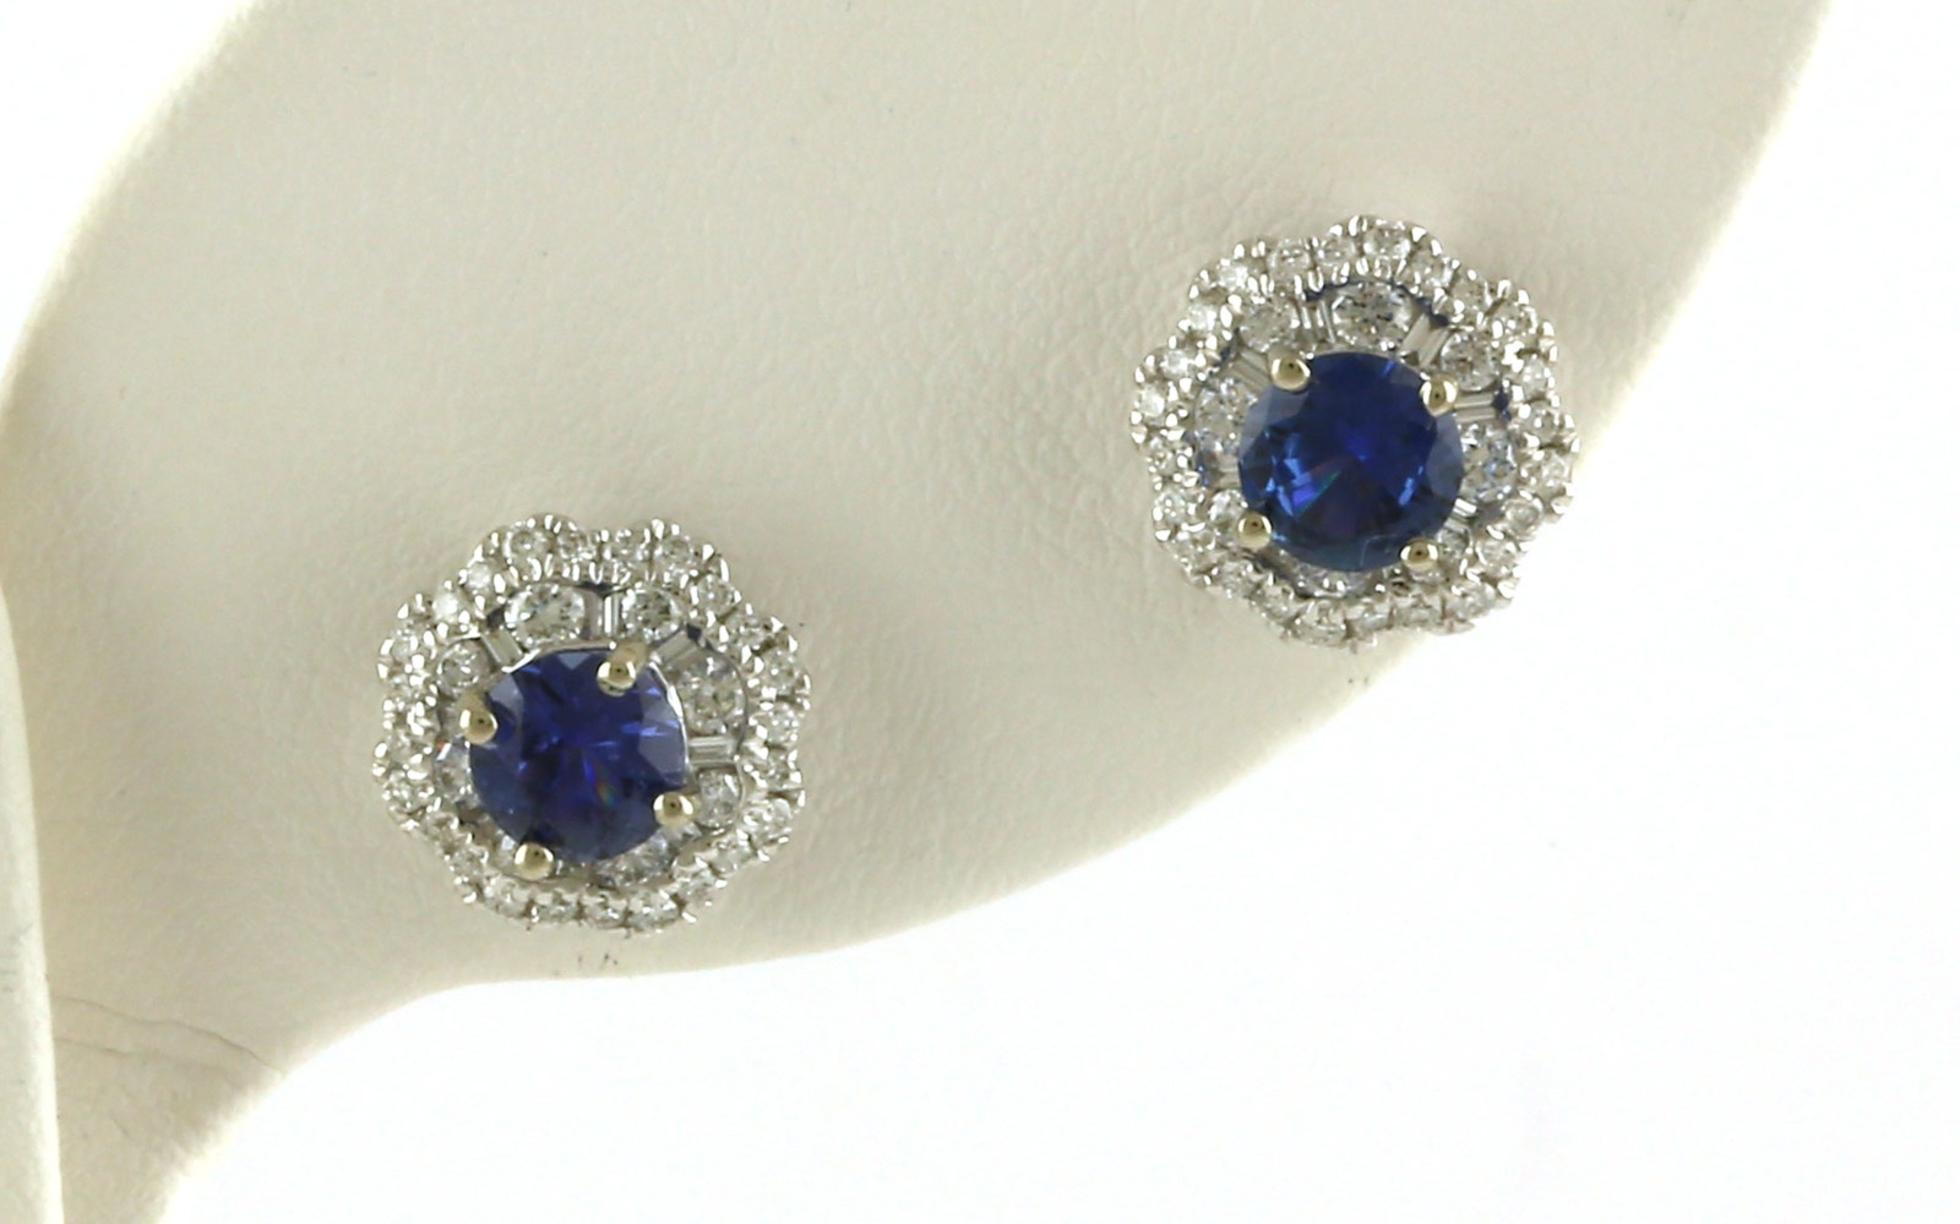 Floral Double Halo-style Montana Yogo Sapphire and Diamond Stud Earrings in White Gold (1.69cts TWT)